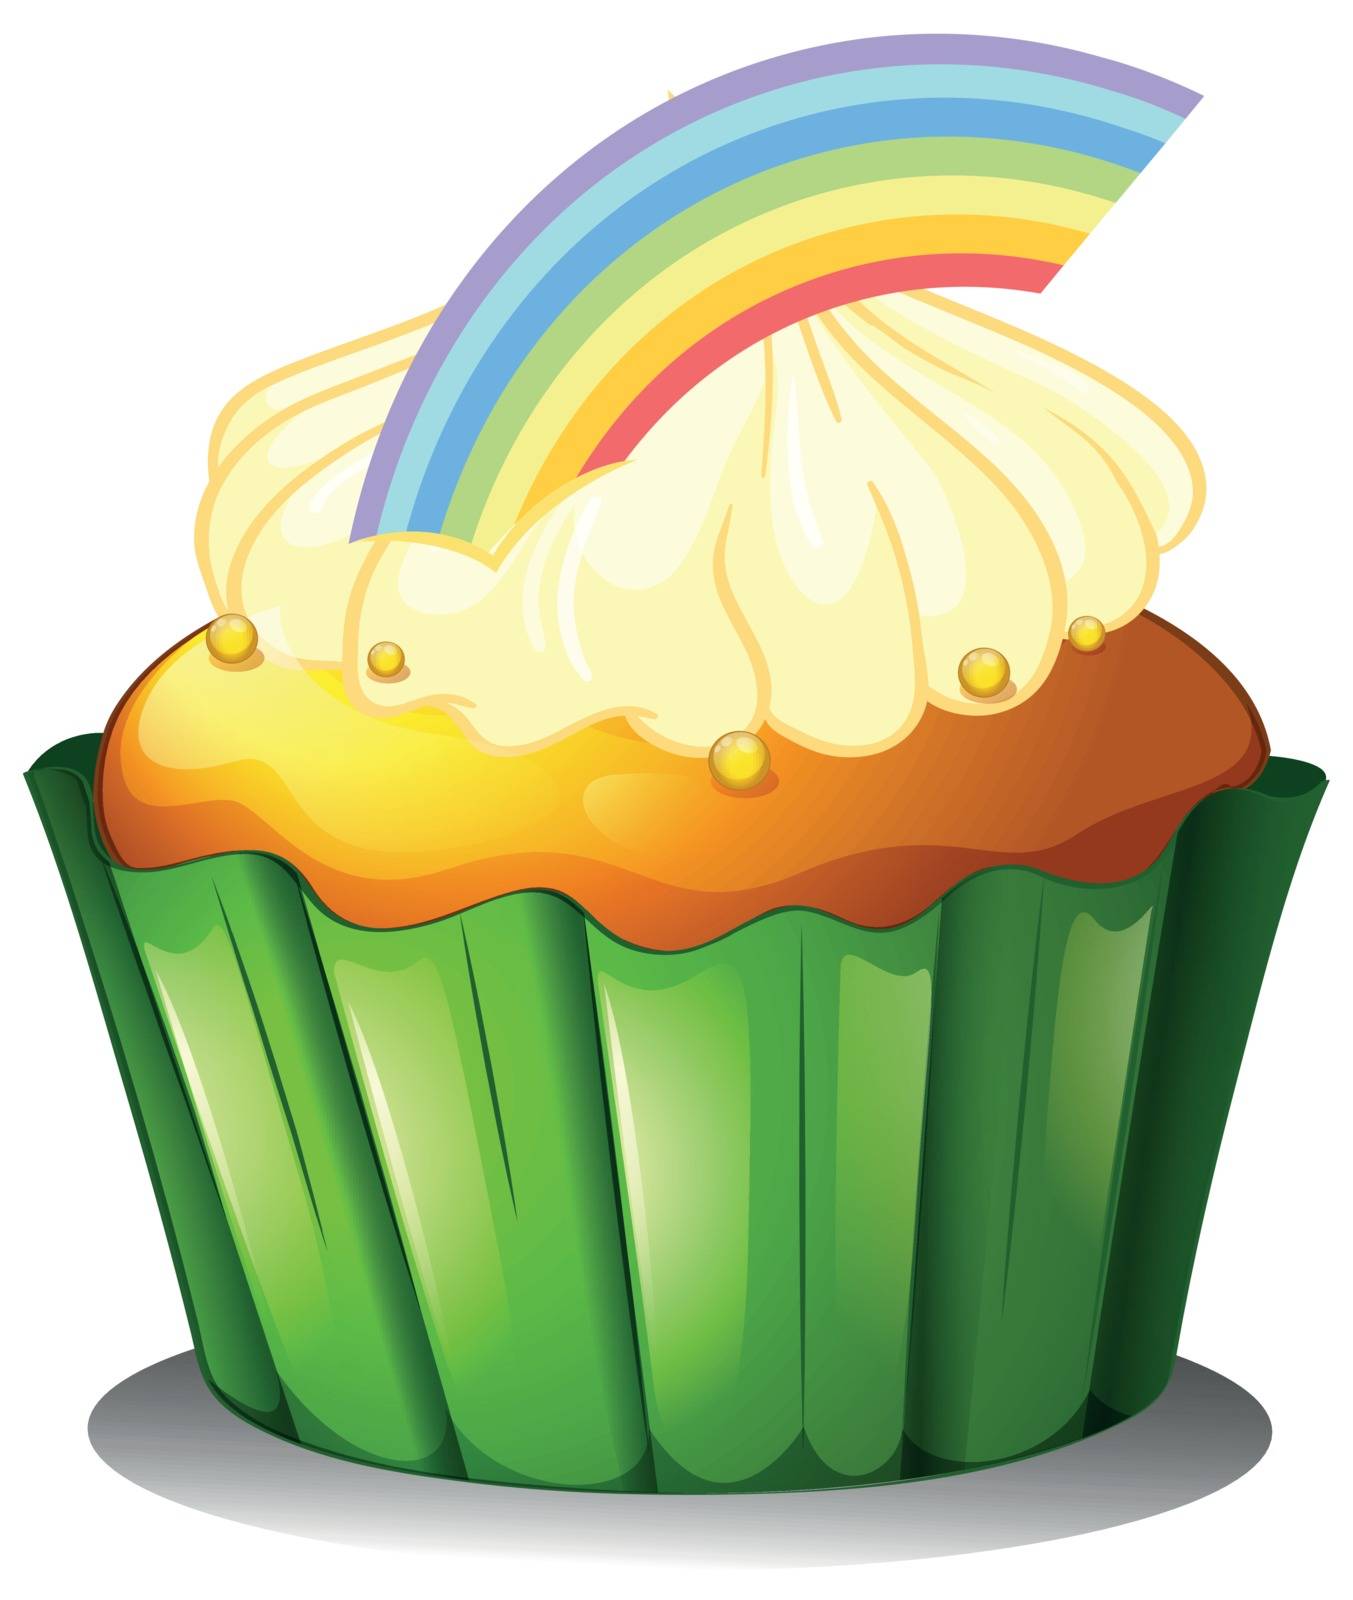 Illustration of a cupcake with rainbow on a white background